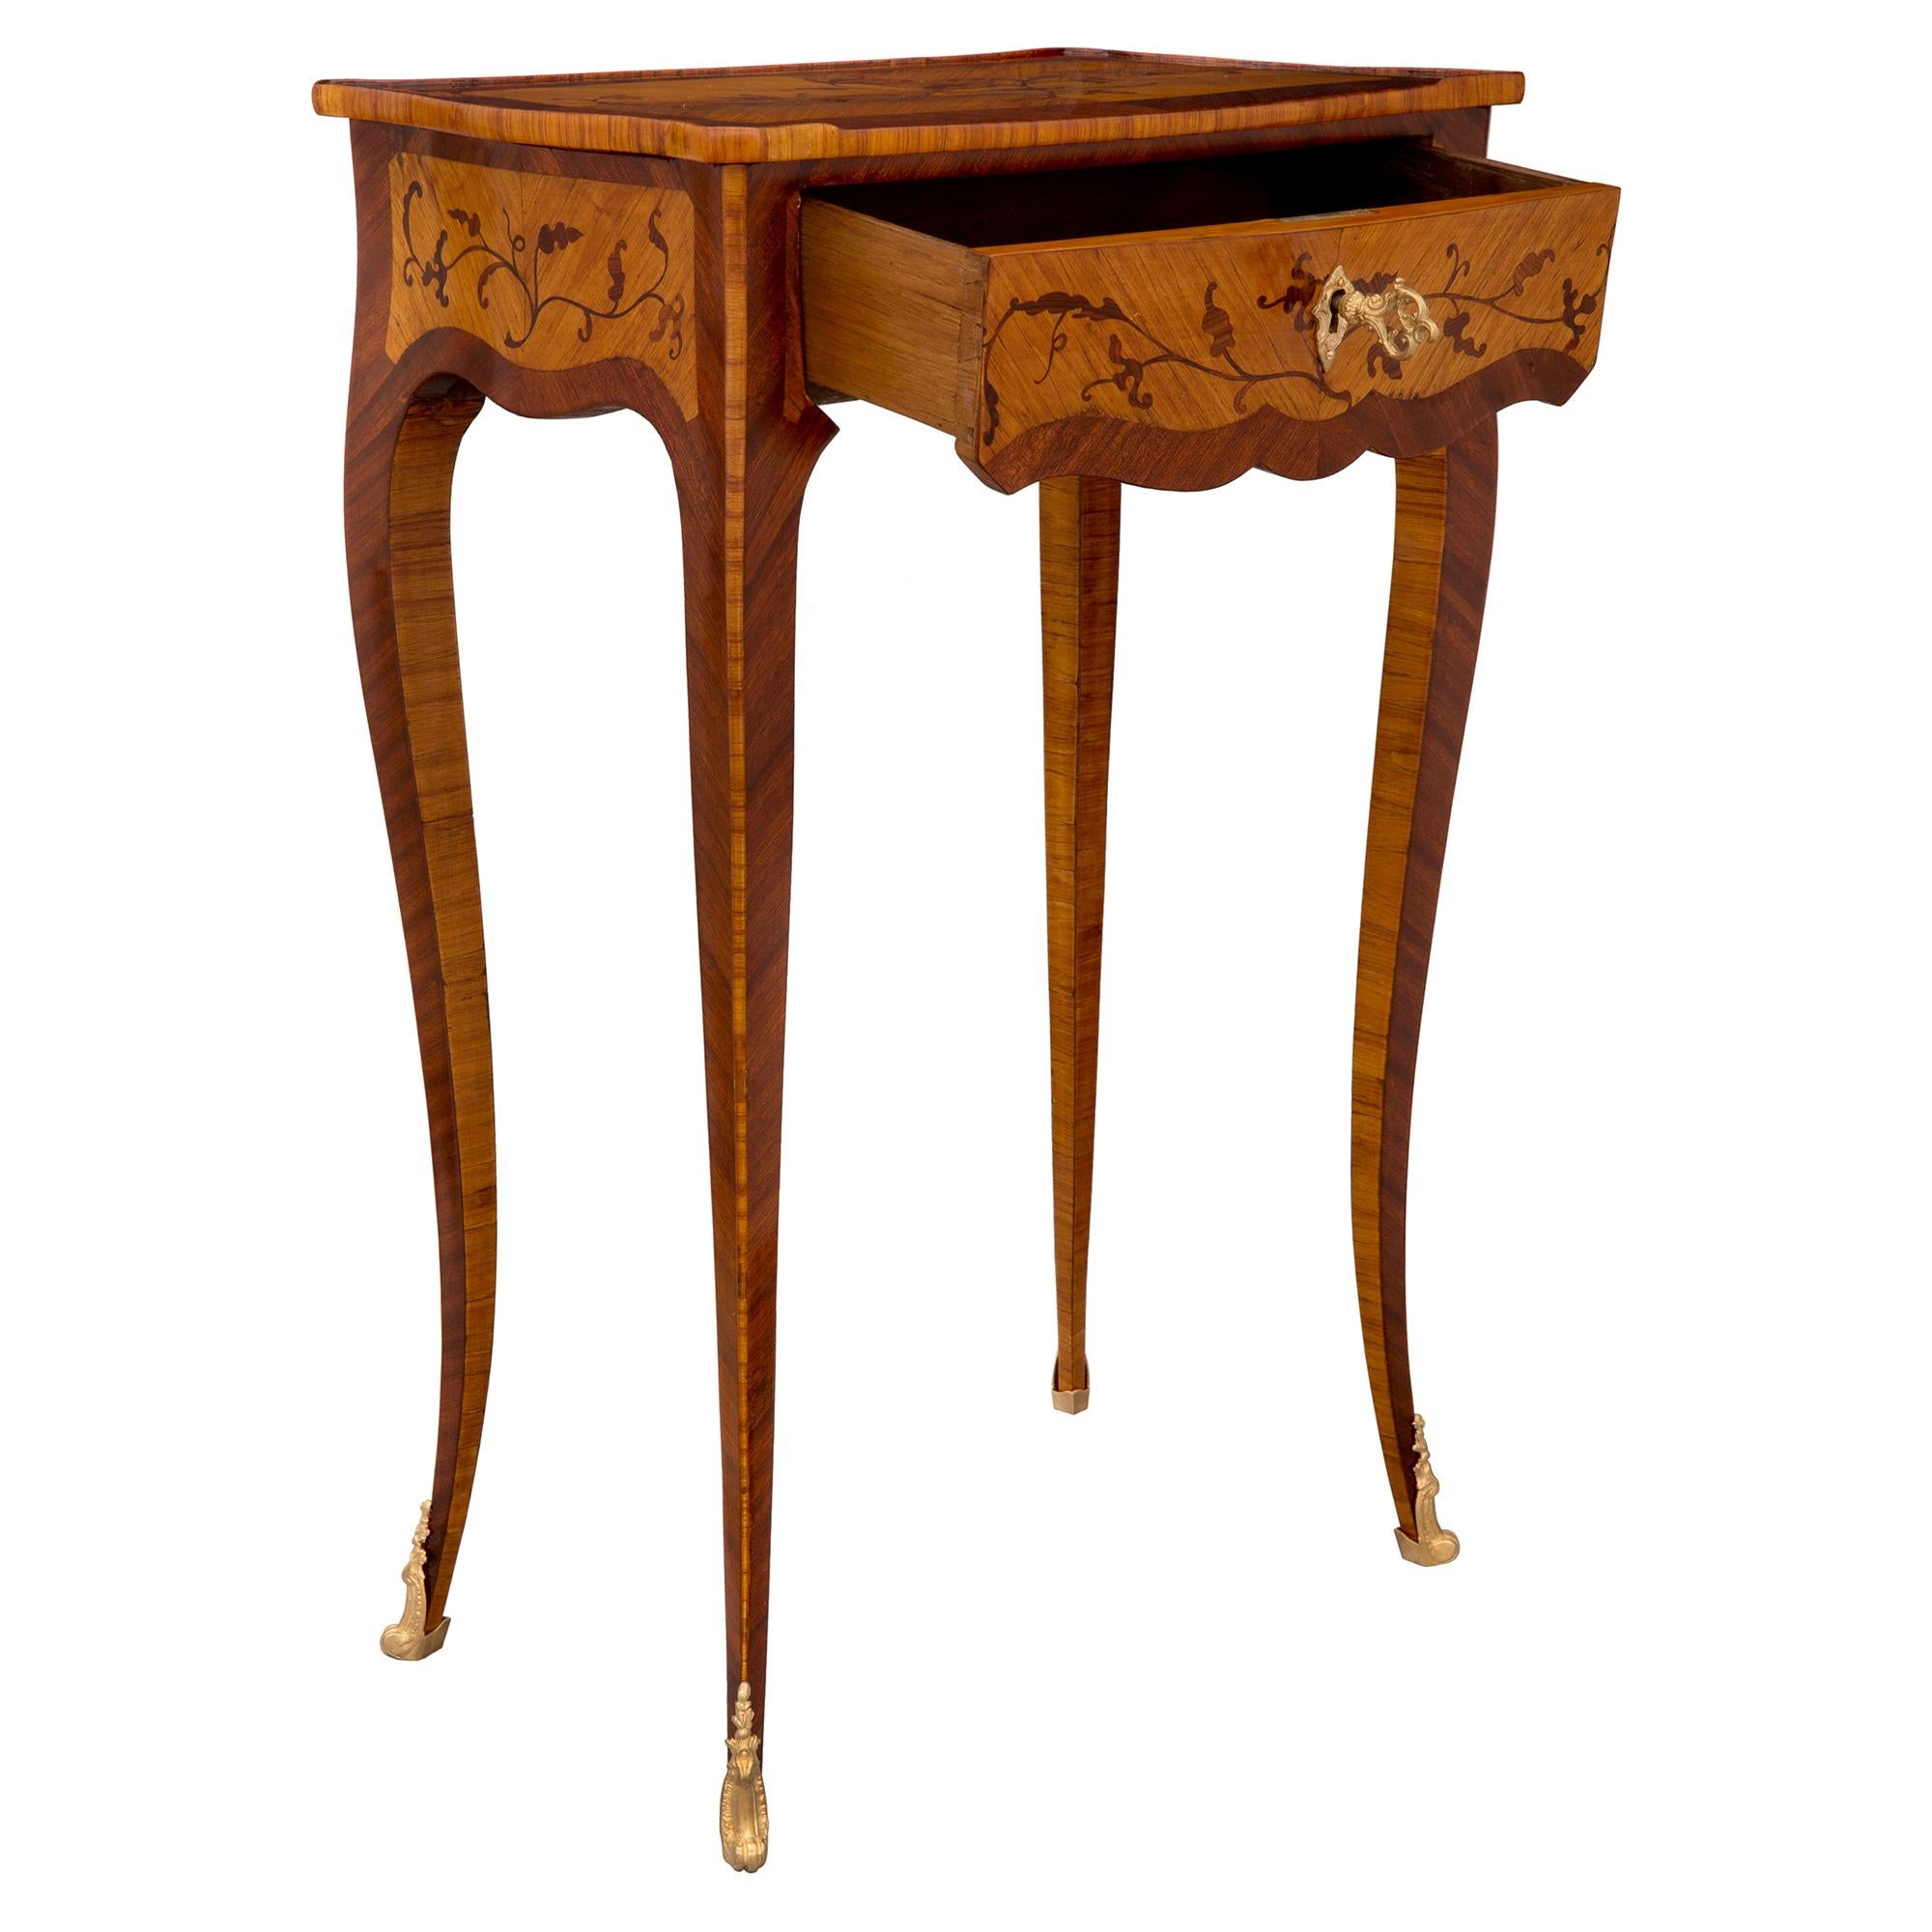 French 19th Century Louis XV Style Kingwood, Tulipwood and Ormolu Side Table For Sale 1